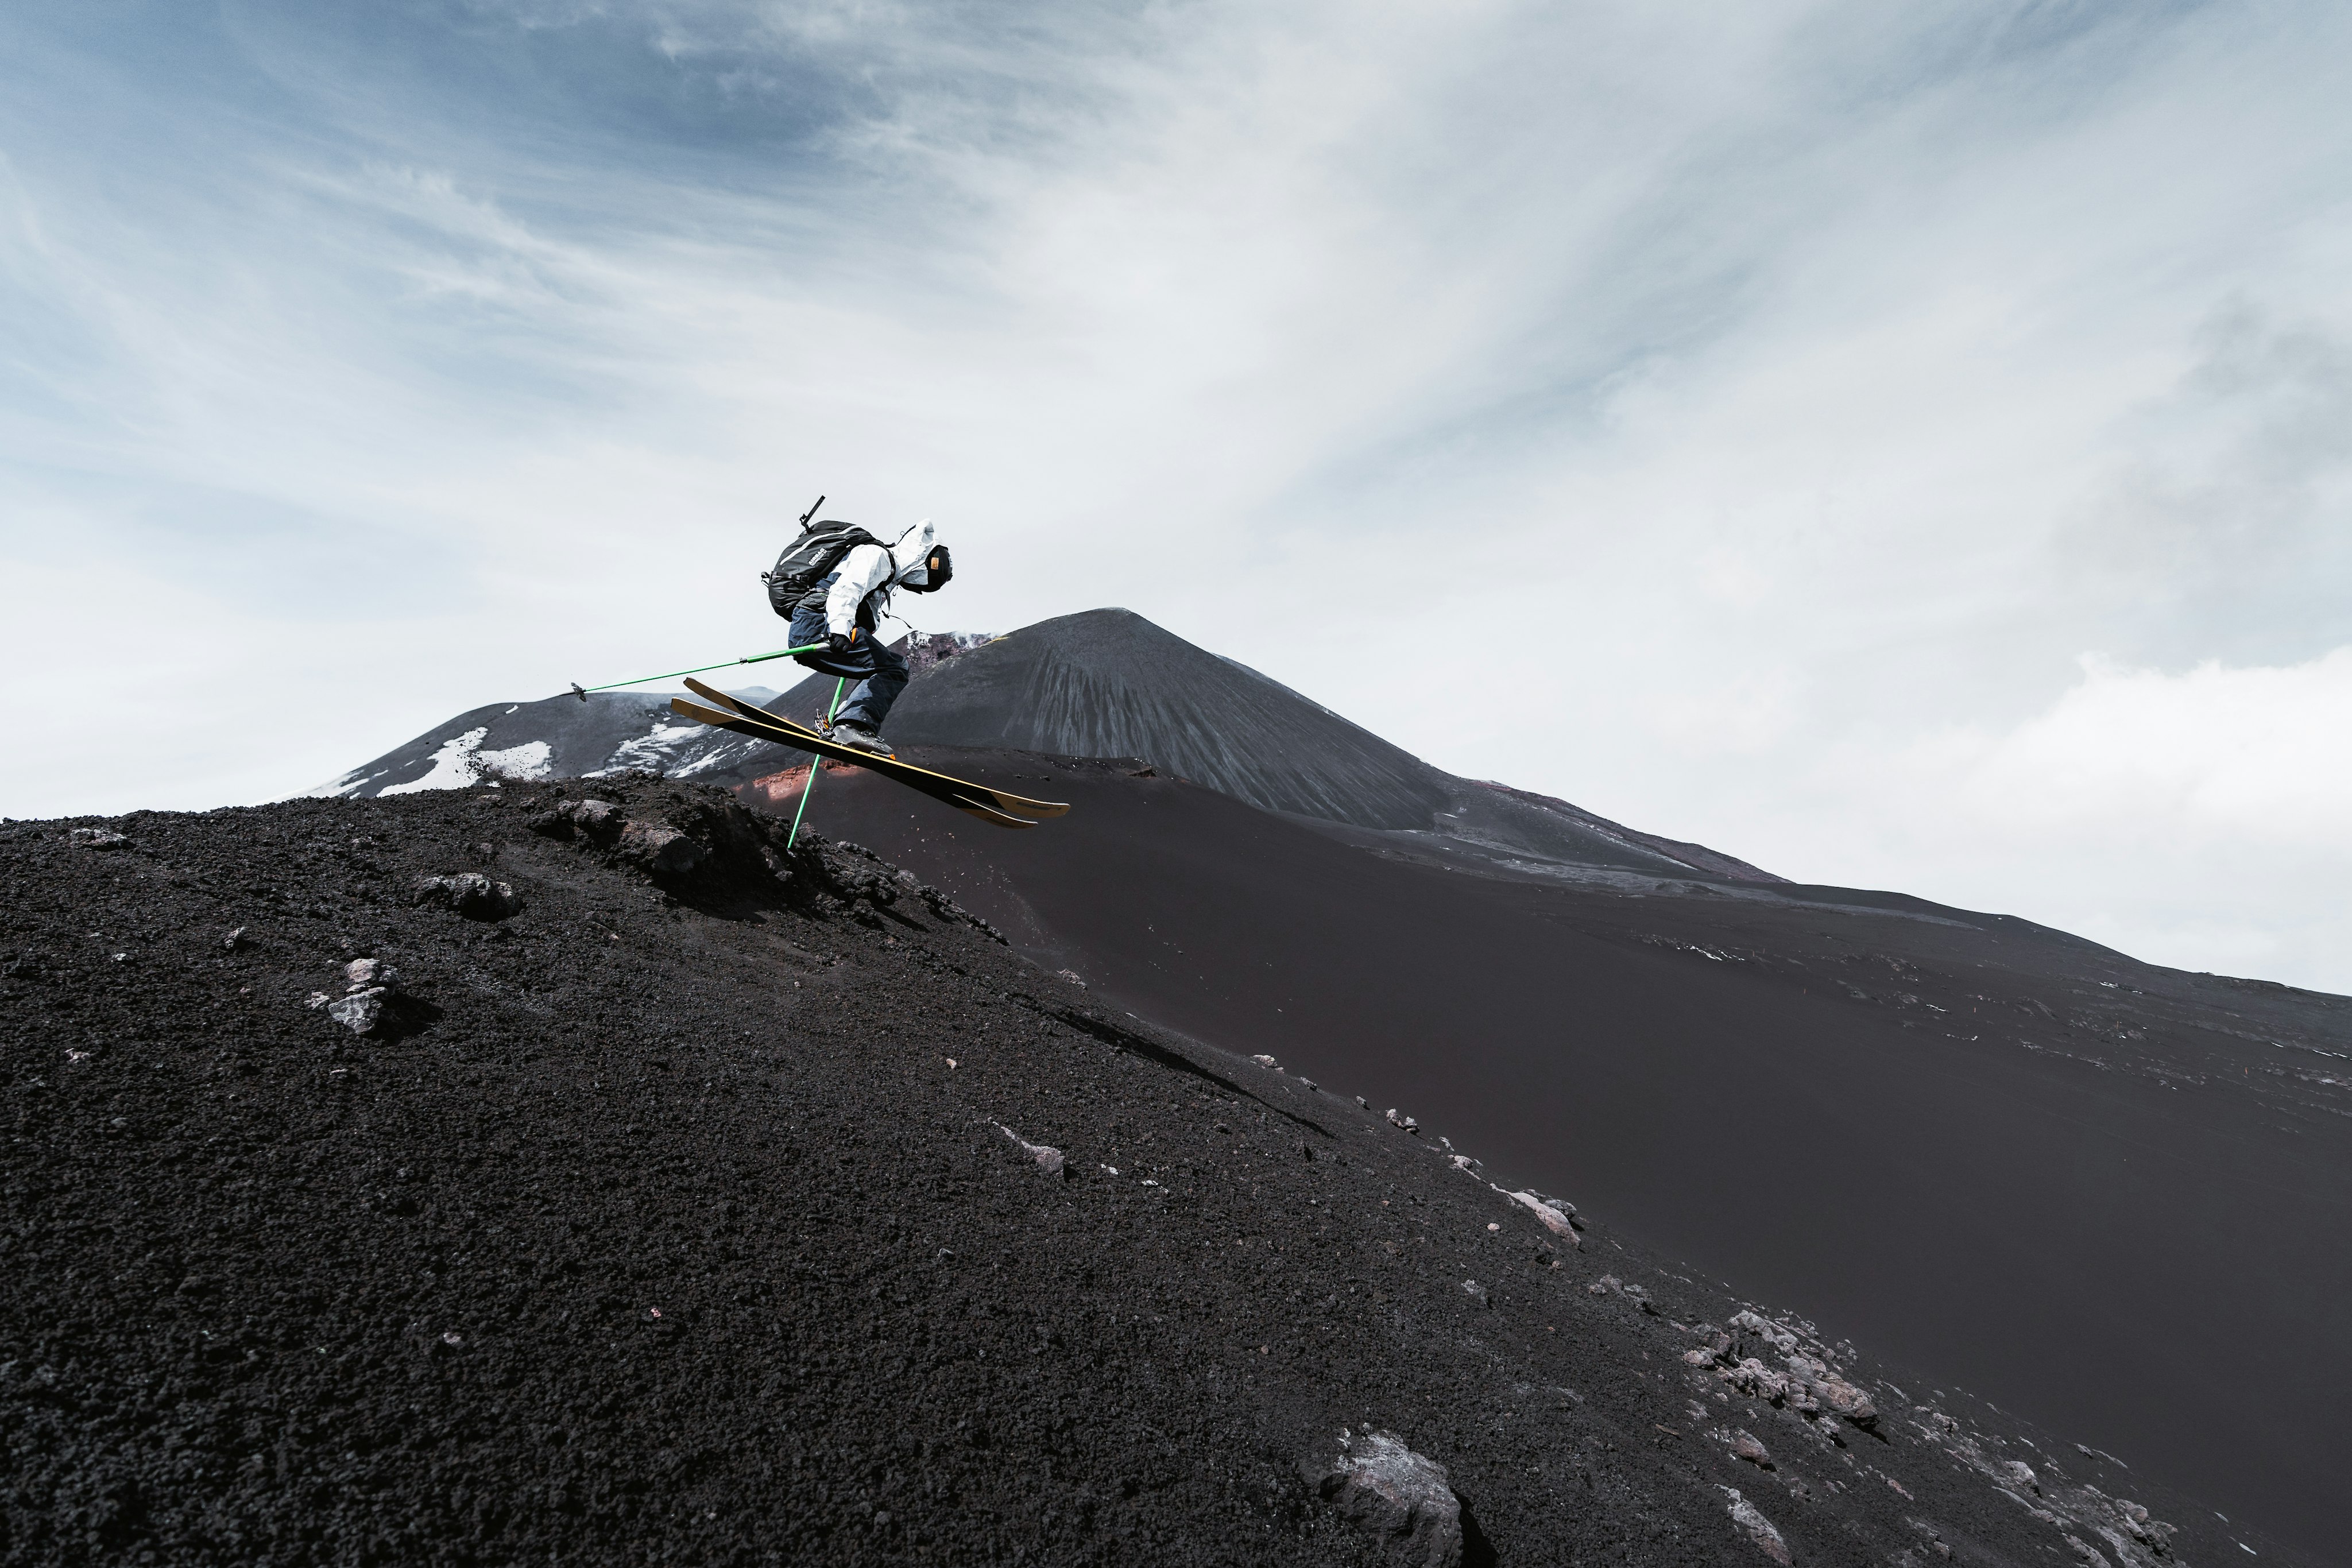 Skis on a volcano with black ash.